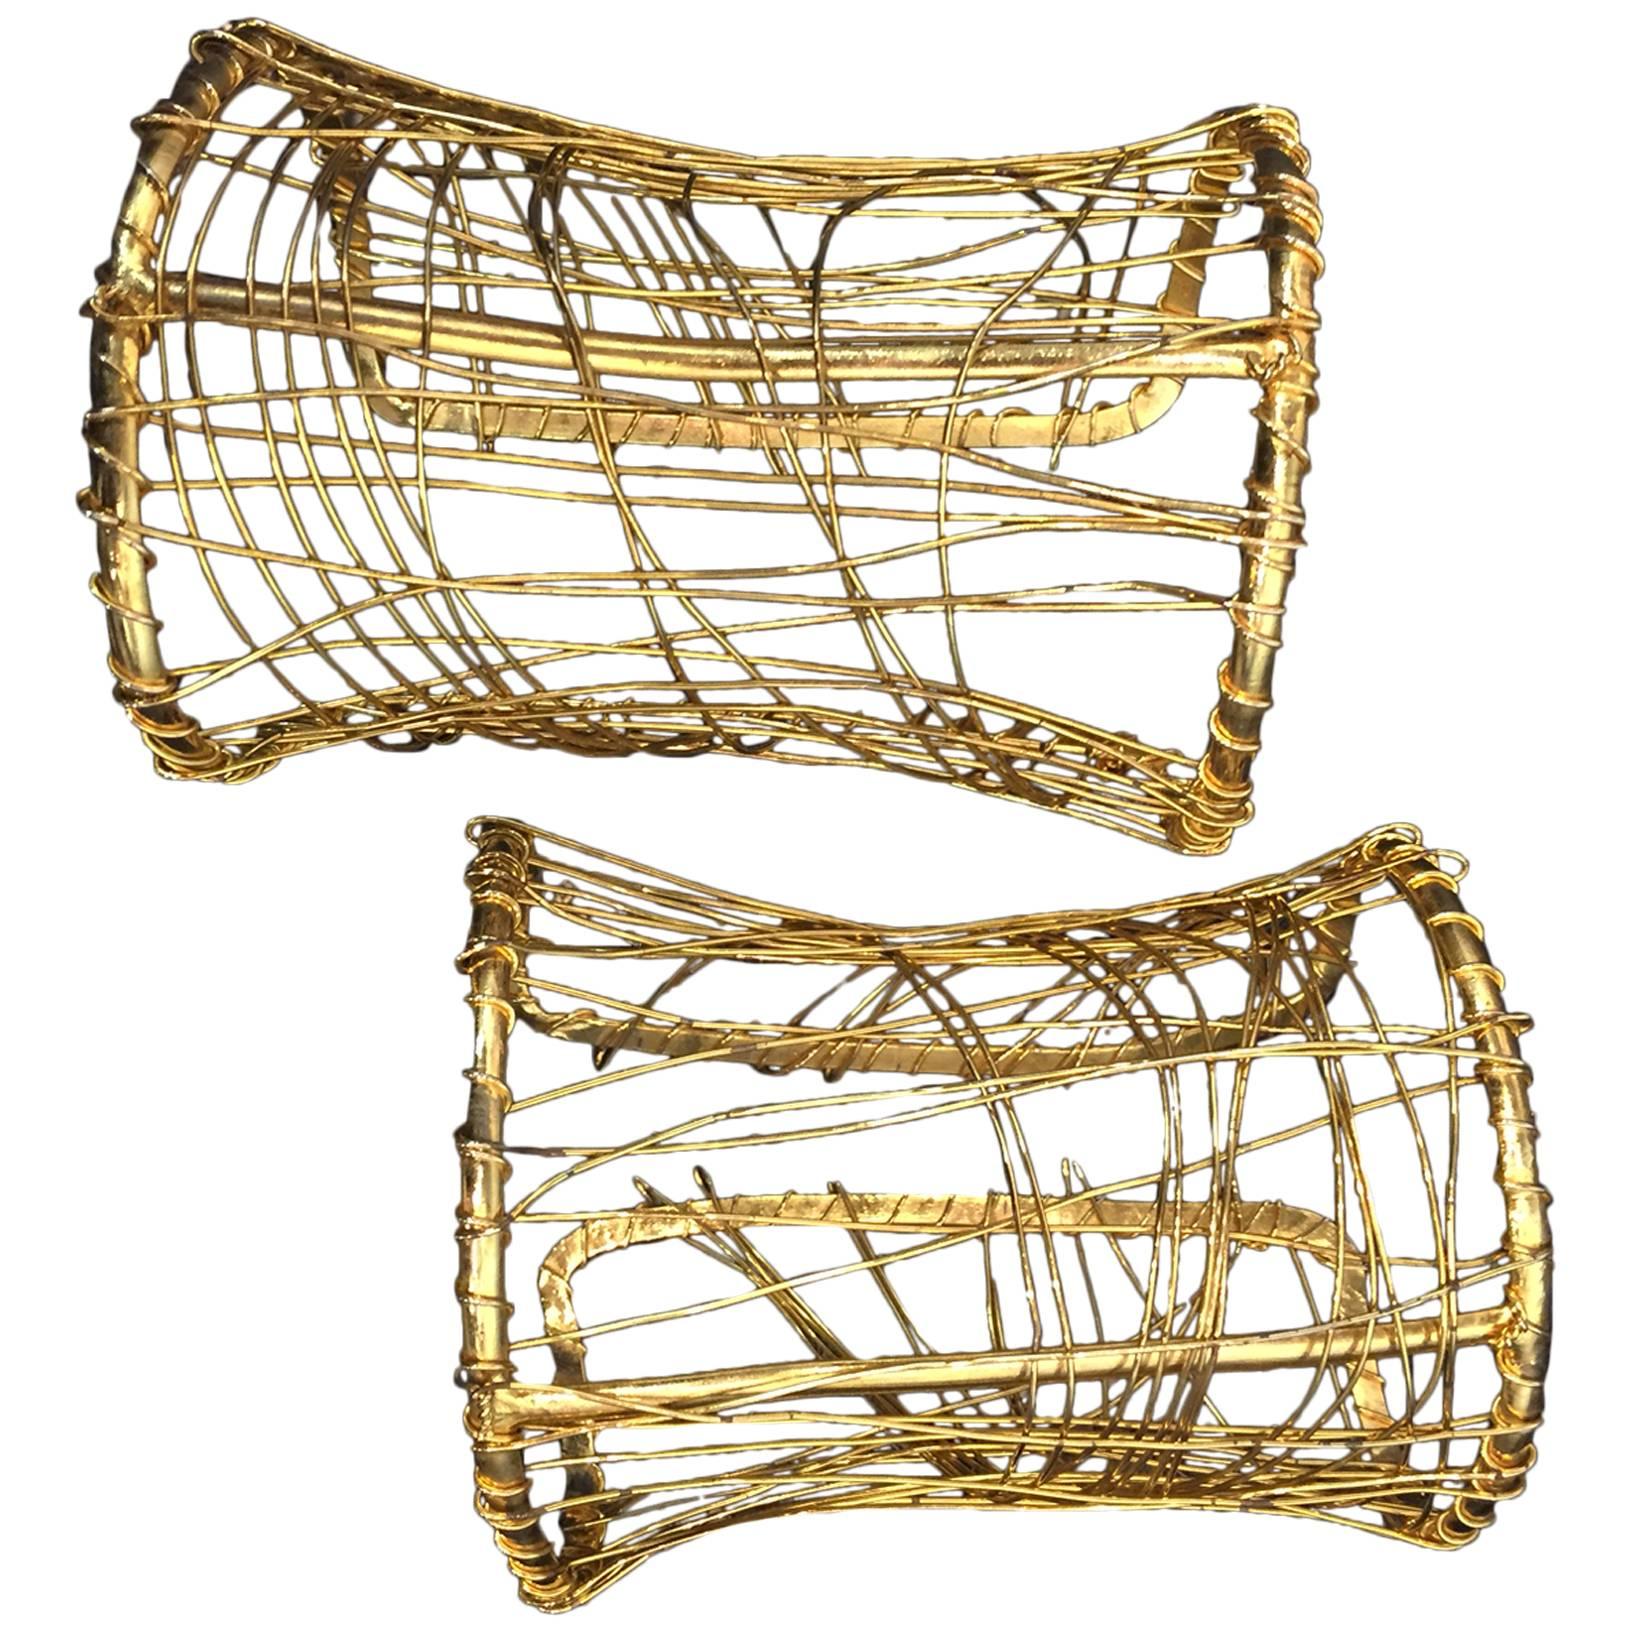 1980s Pair of Gold-Tone Wire-Wrapped Art-To-Wear Cuffs